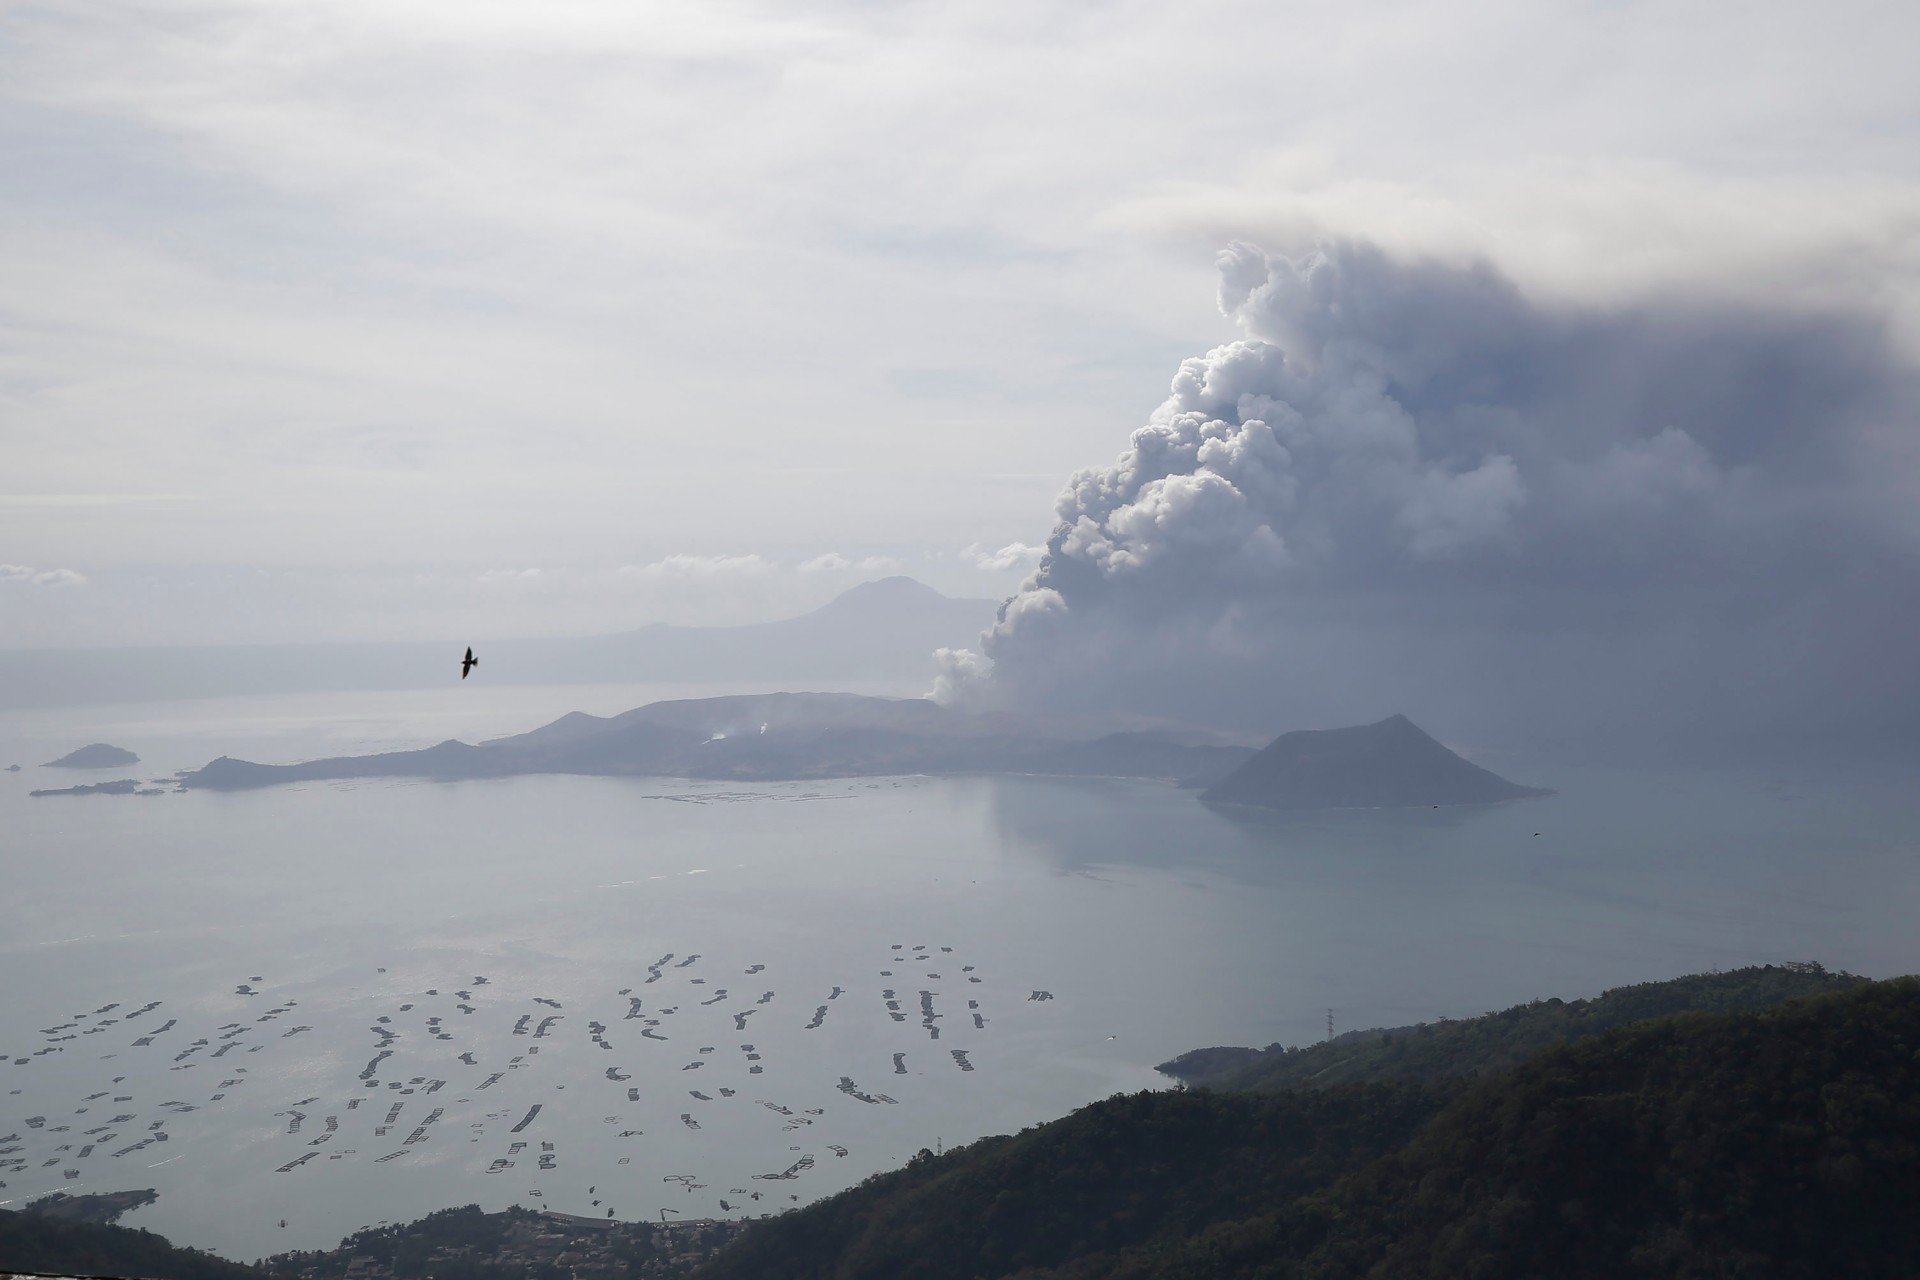 Taal Volcano In The Philippines May Erupt Any Time Soon Geoengineer Org